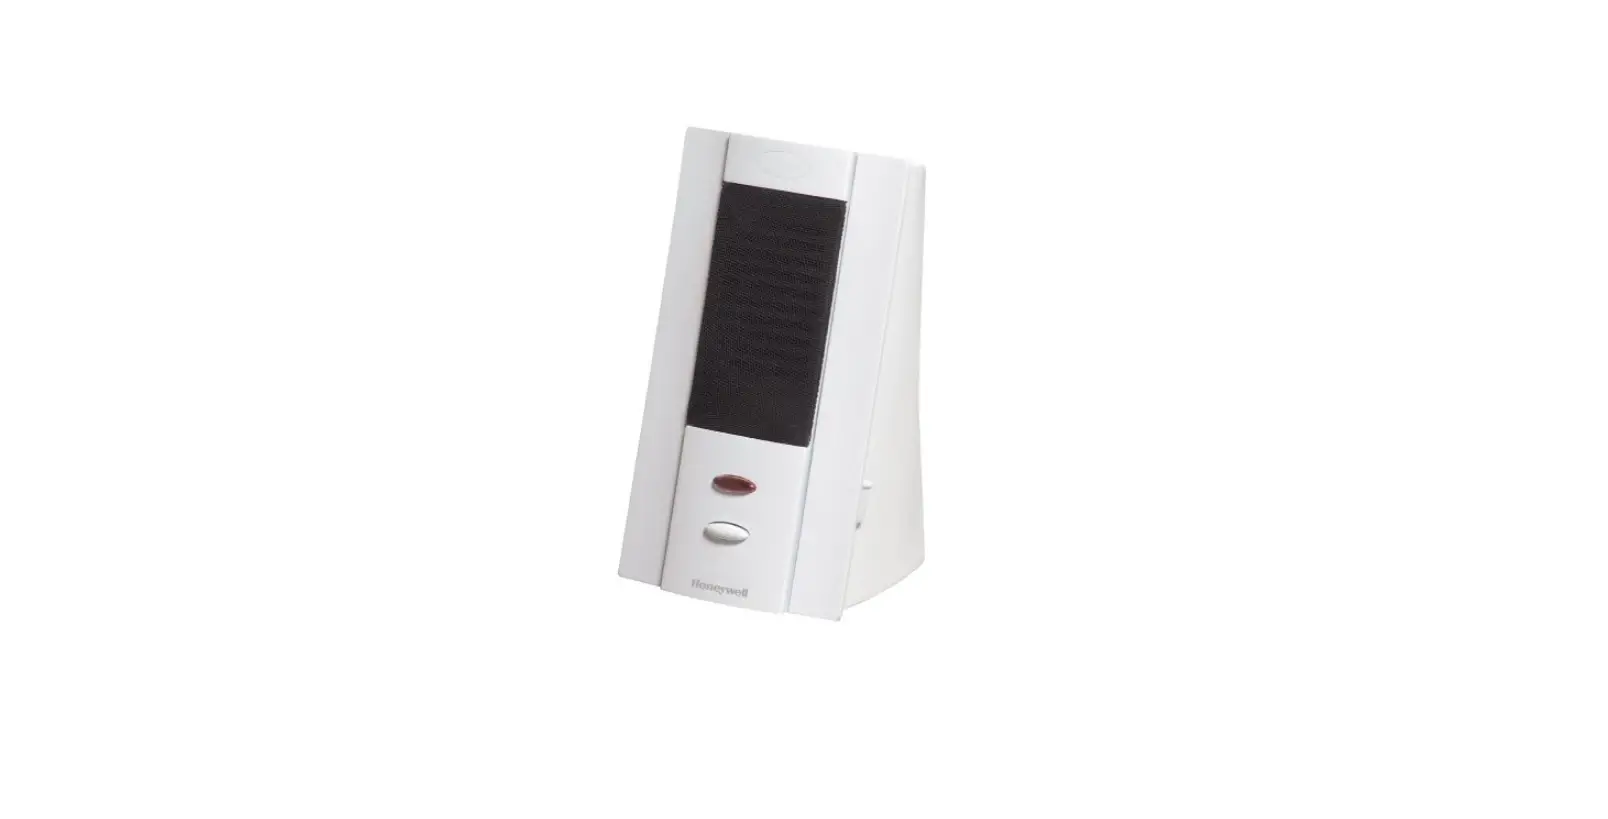 RCWL210A1005/N - Able Wireless Door Chime